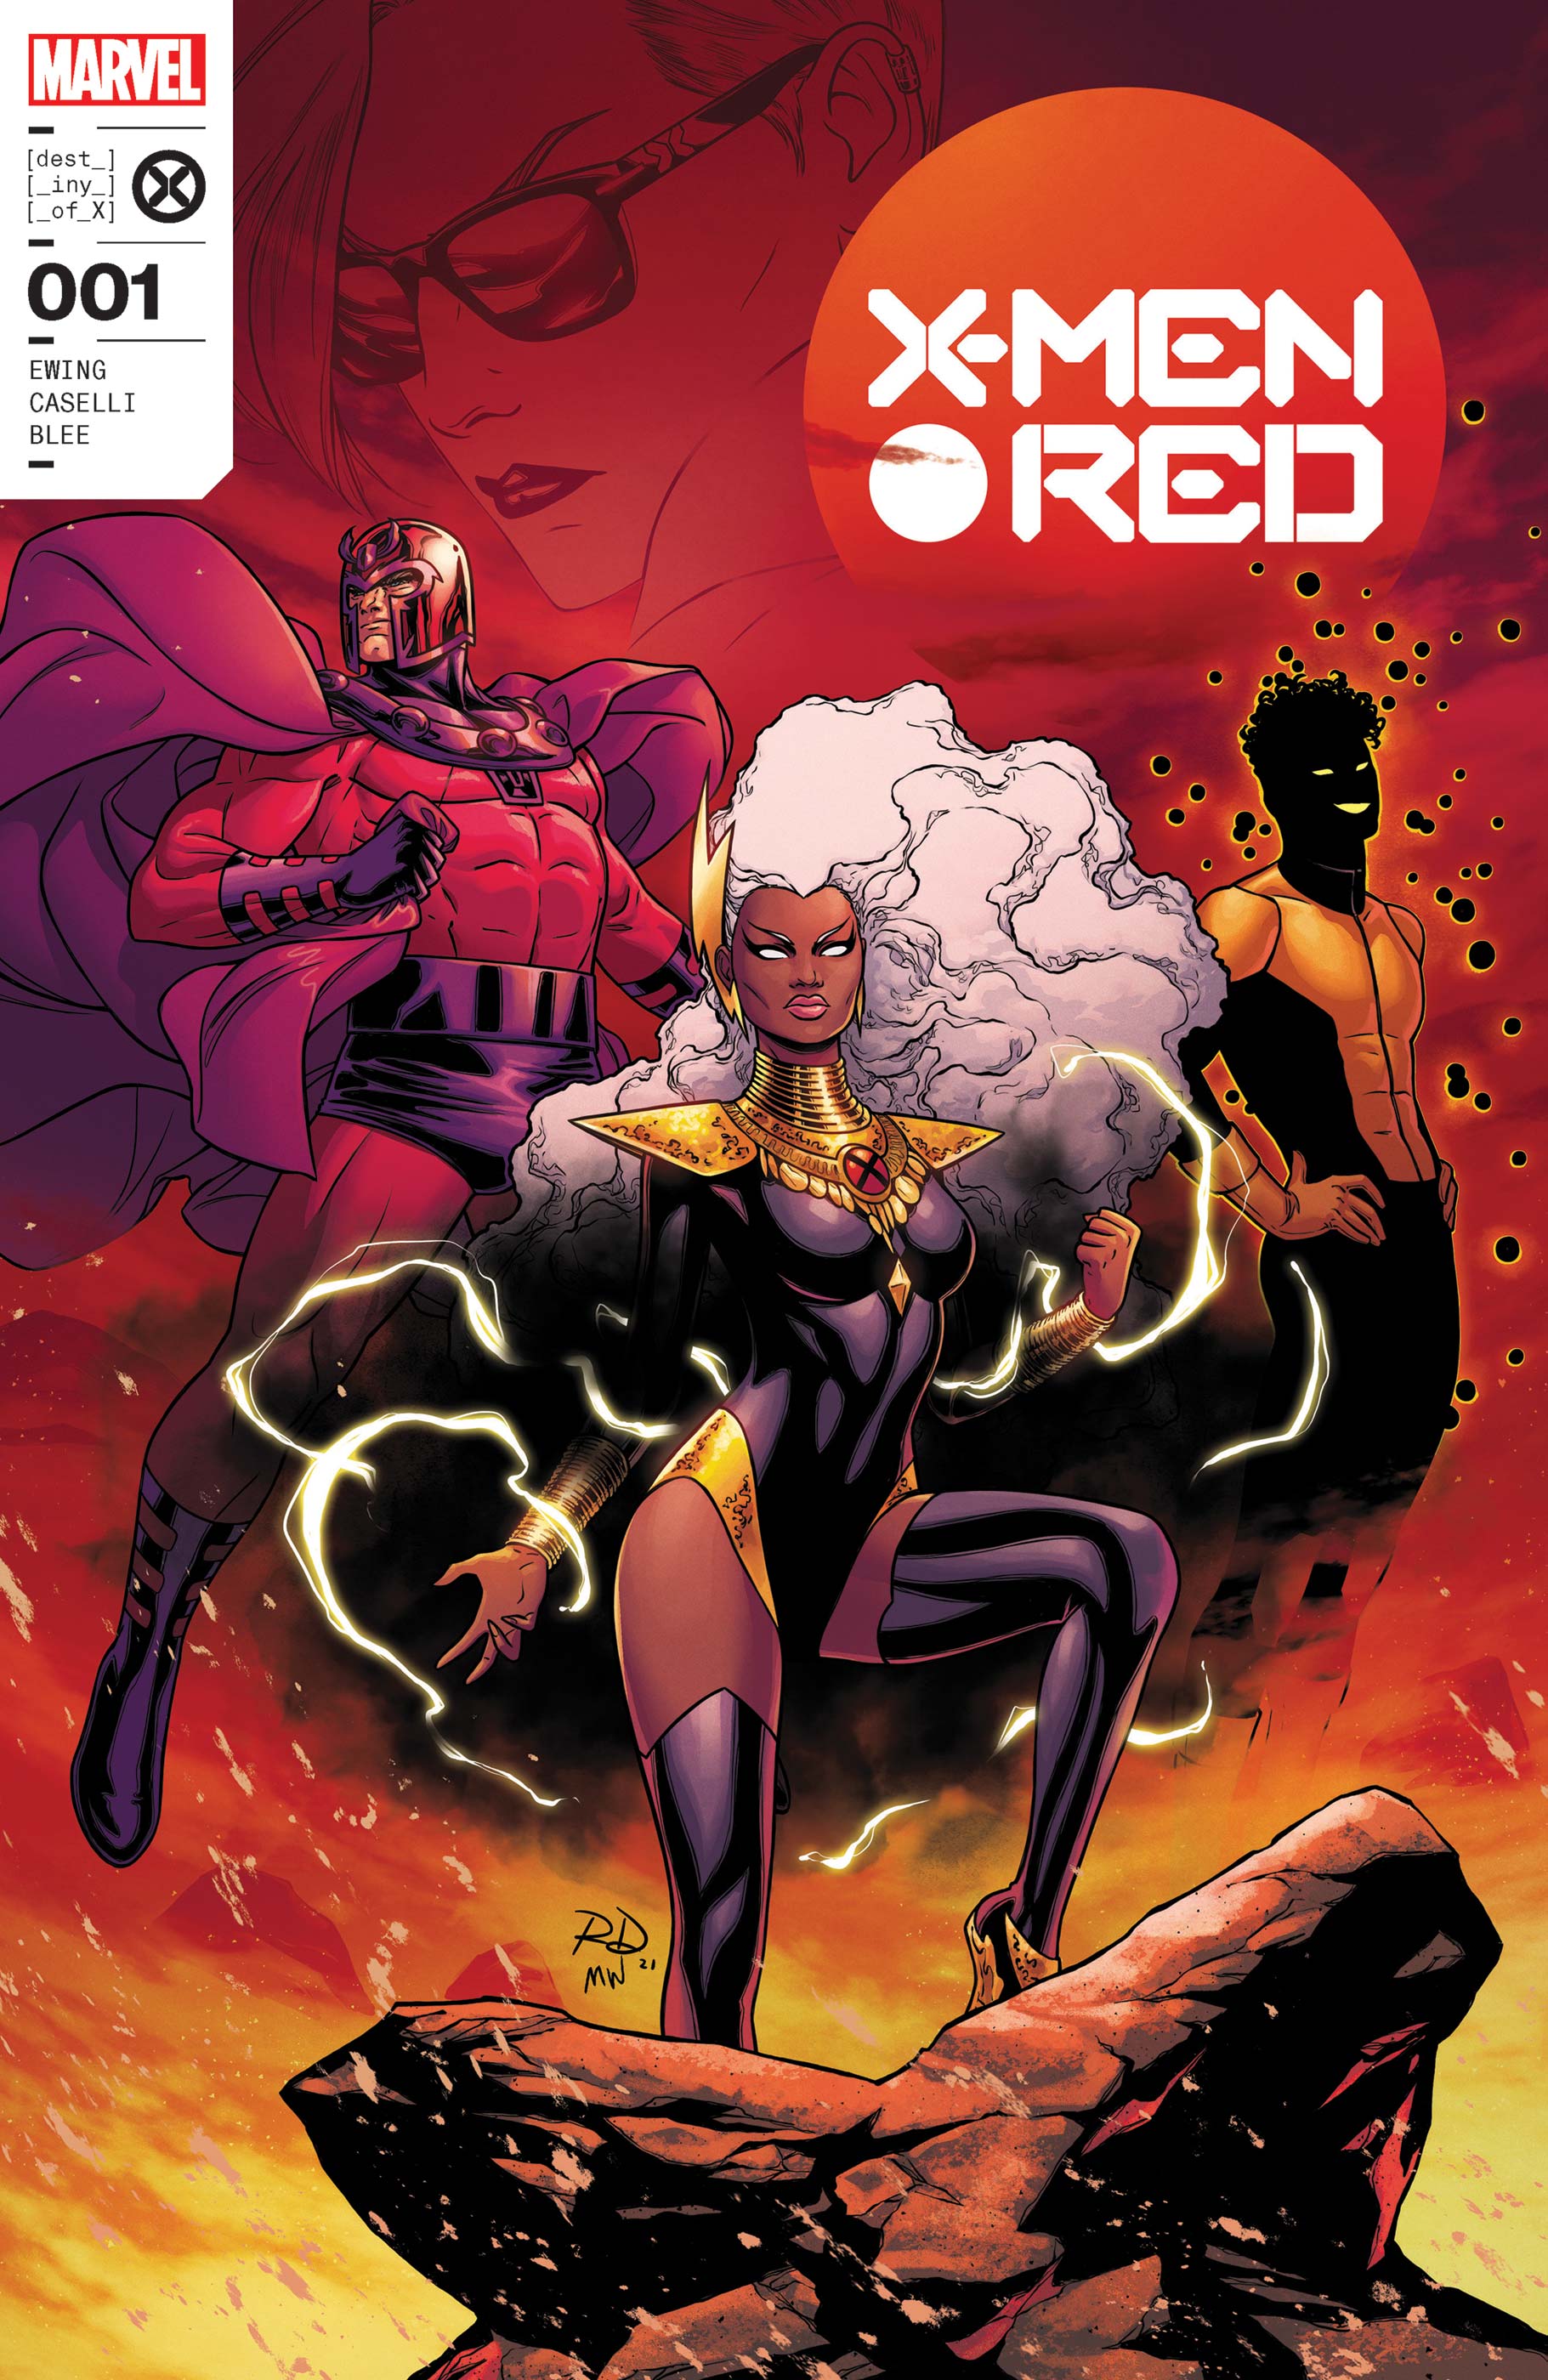 X-Men: Red book cover